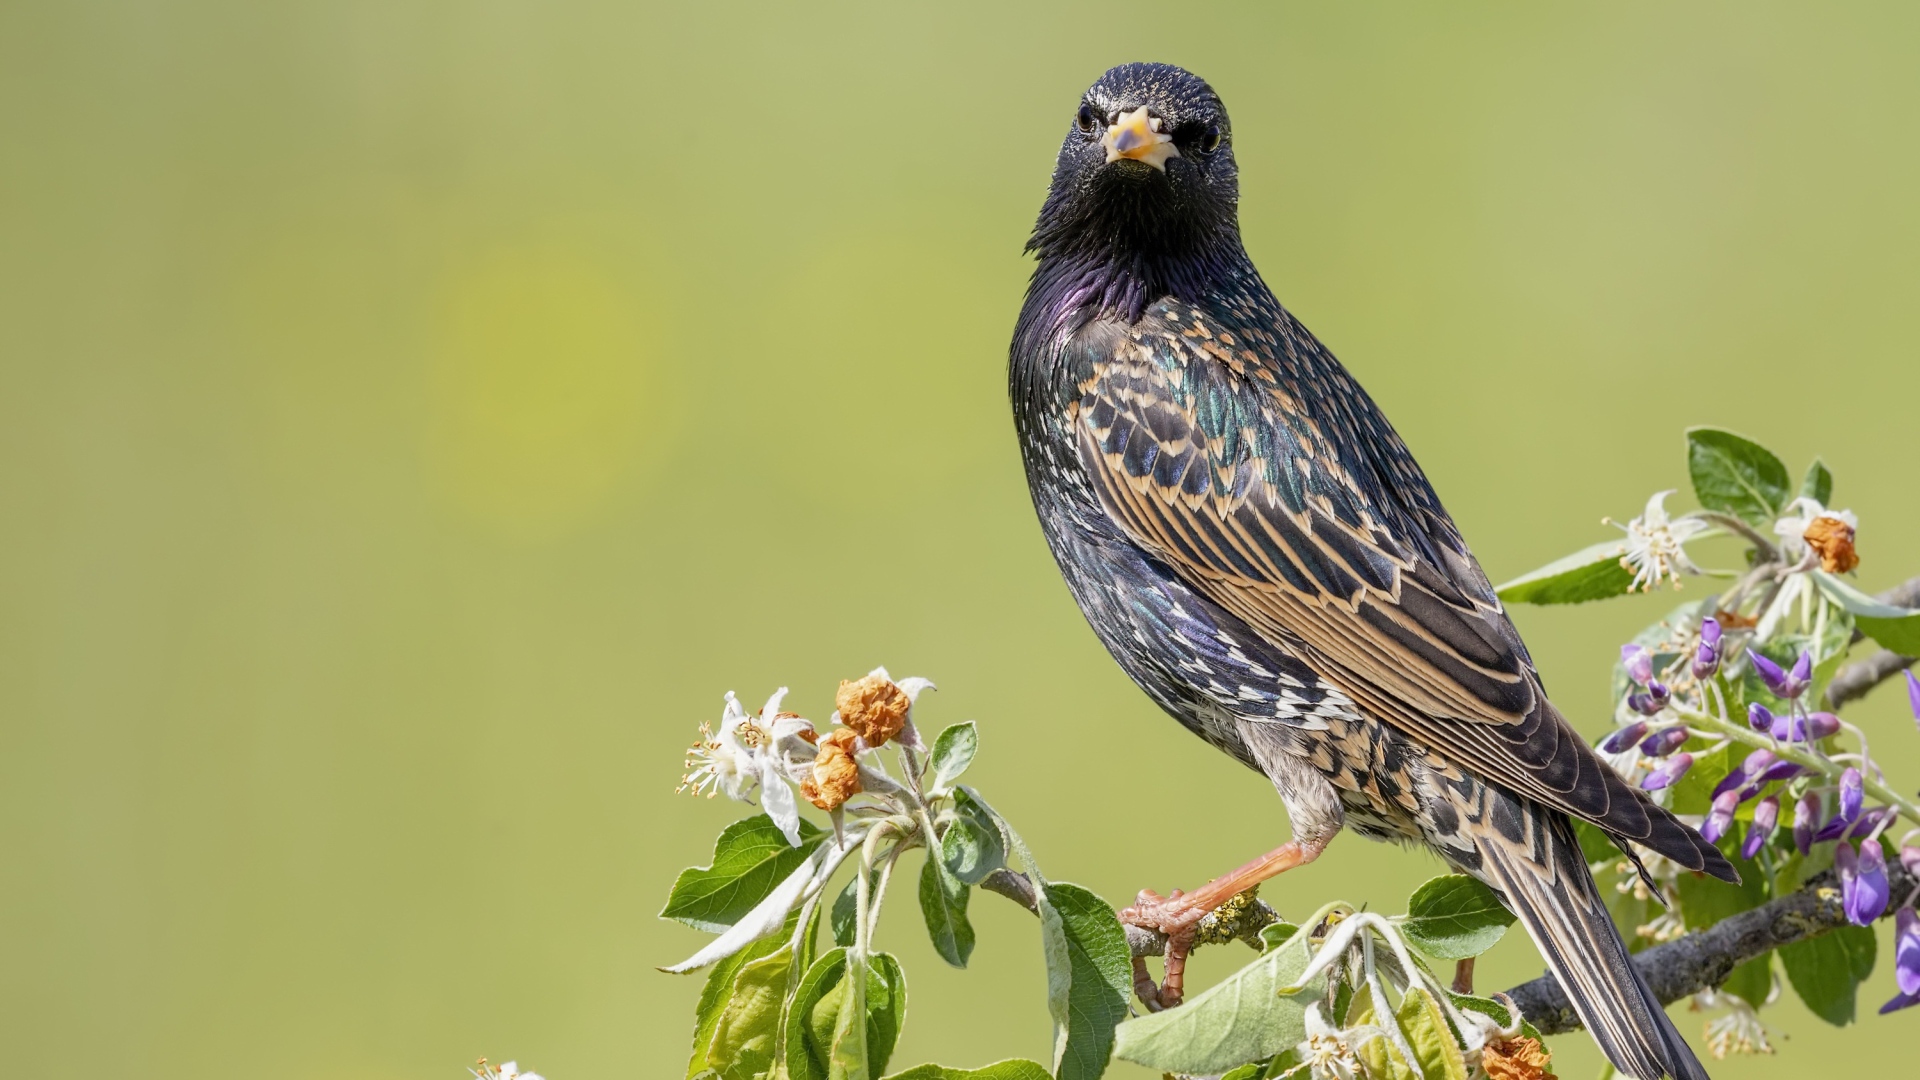 Big starling sits on a tree branch